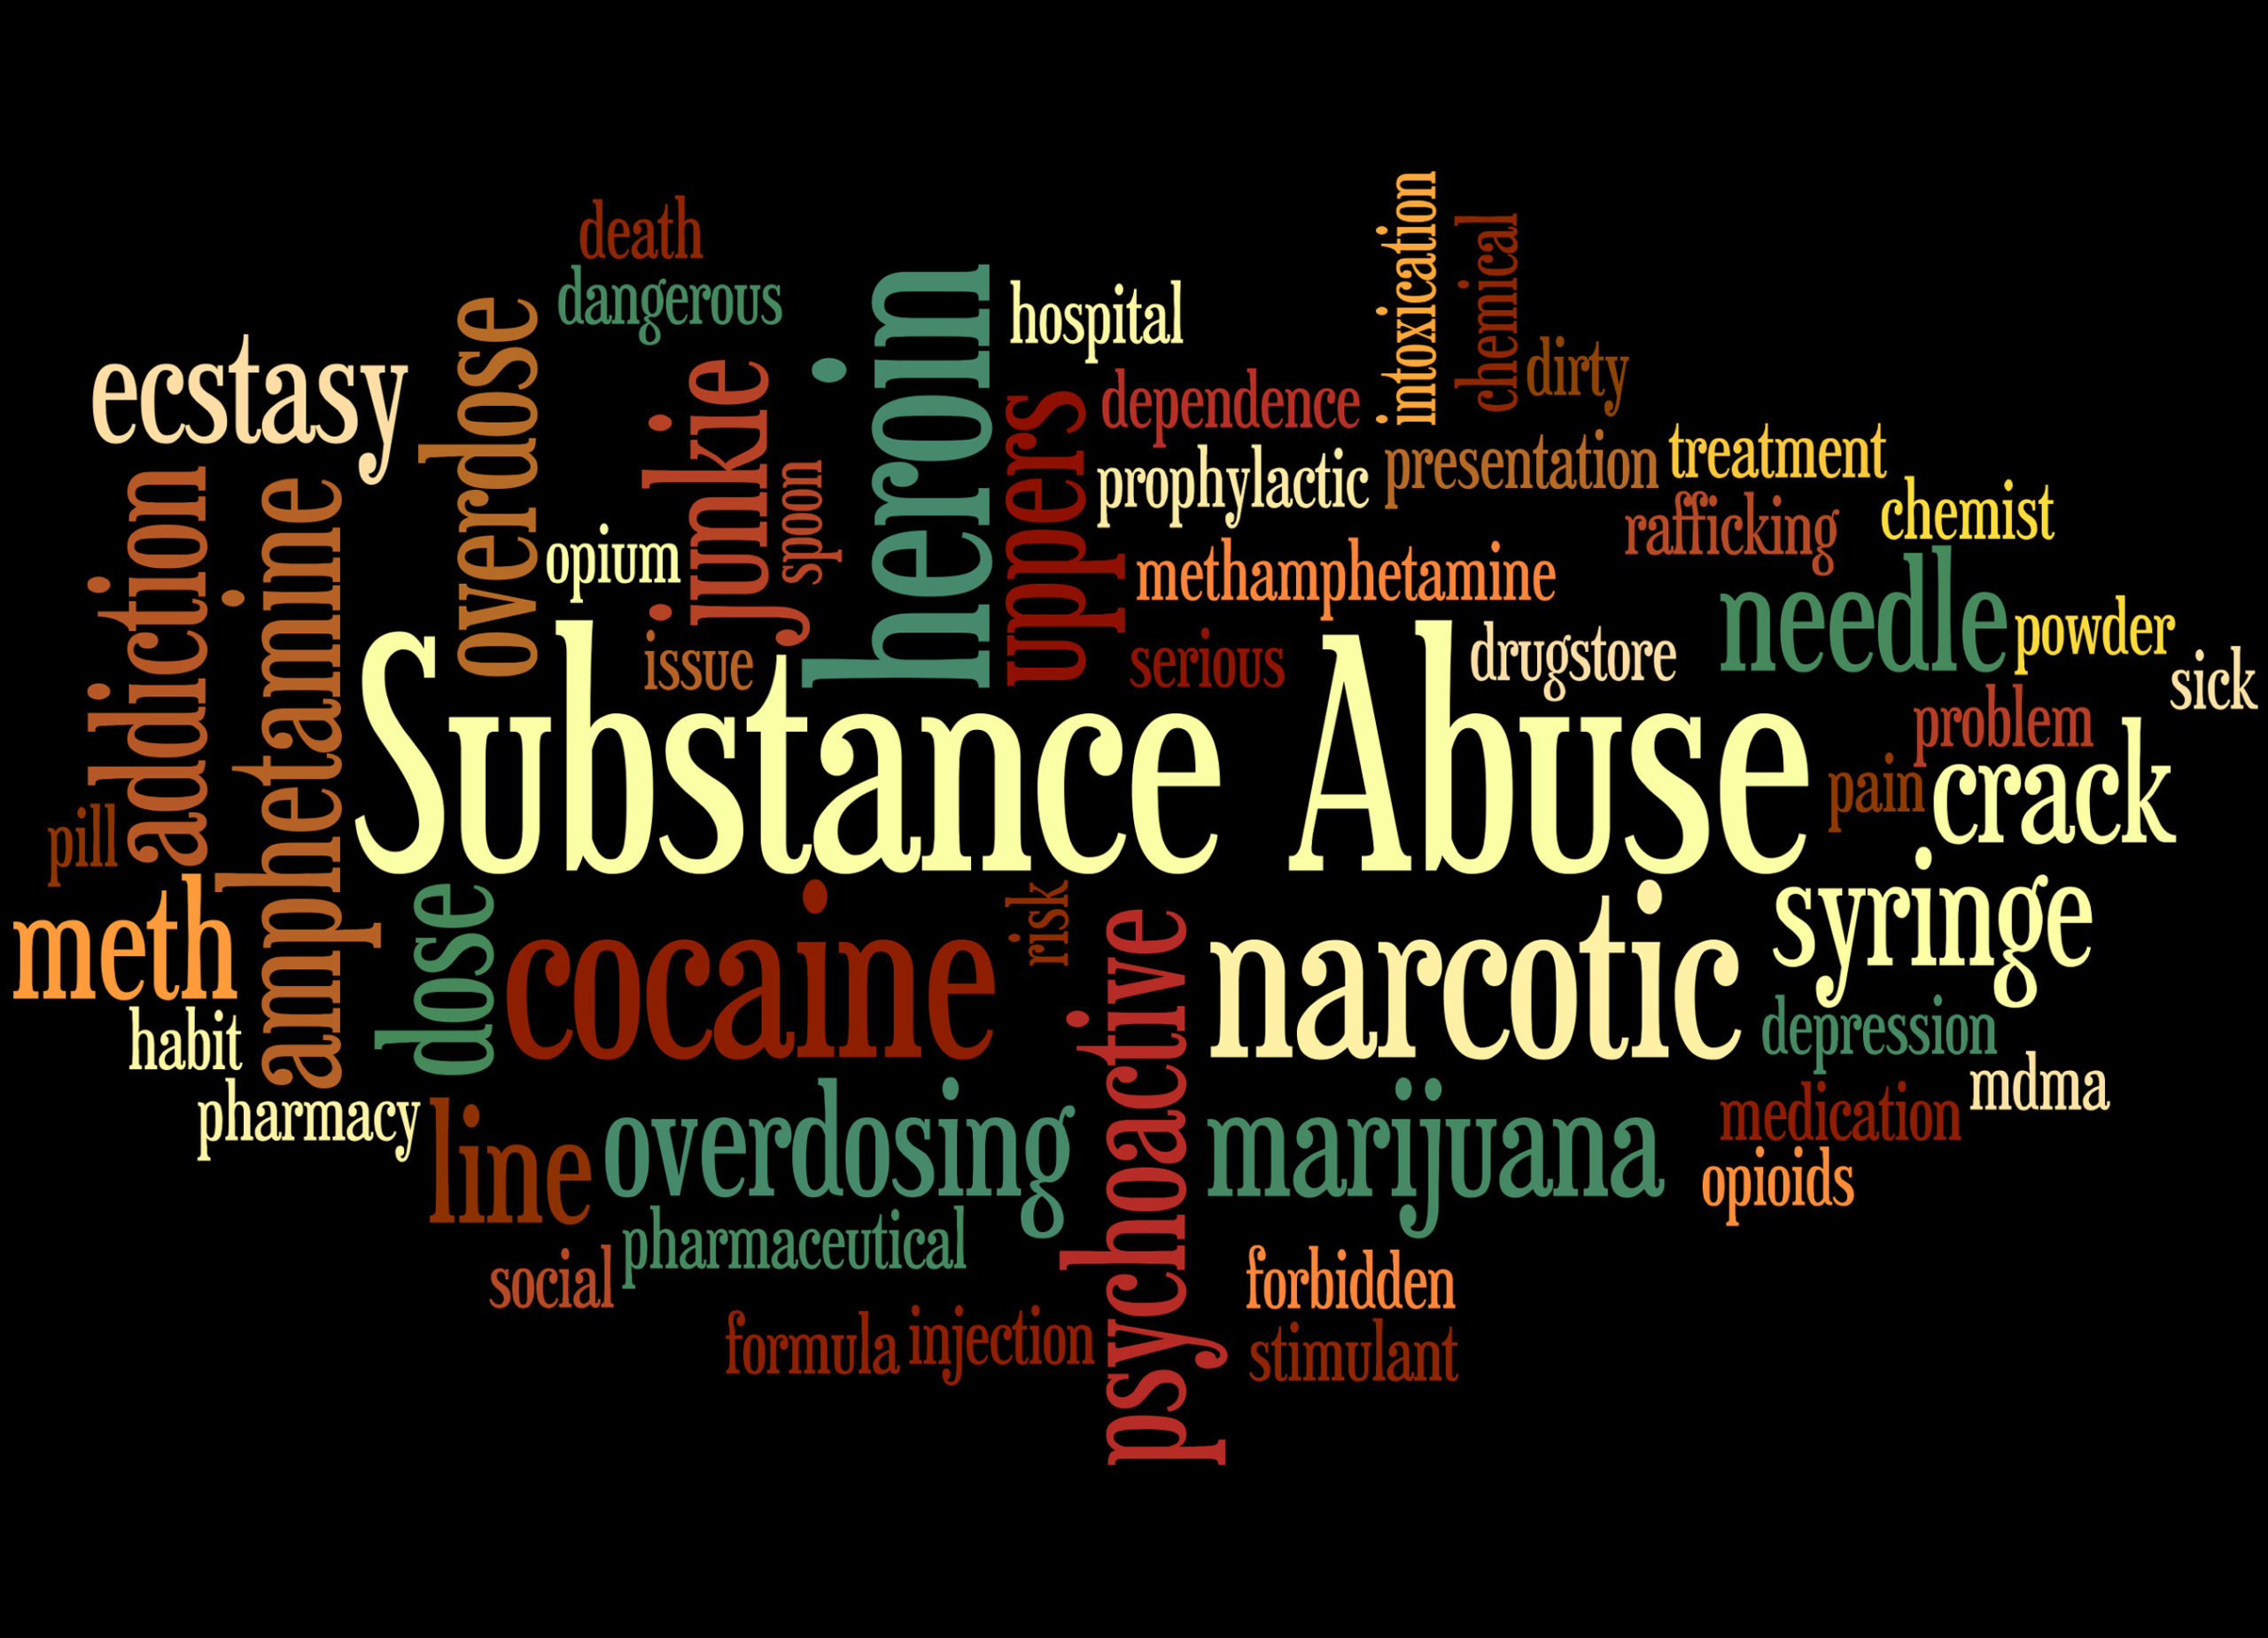 signs of substance abuse